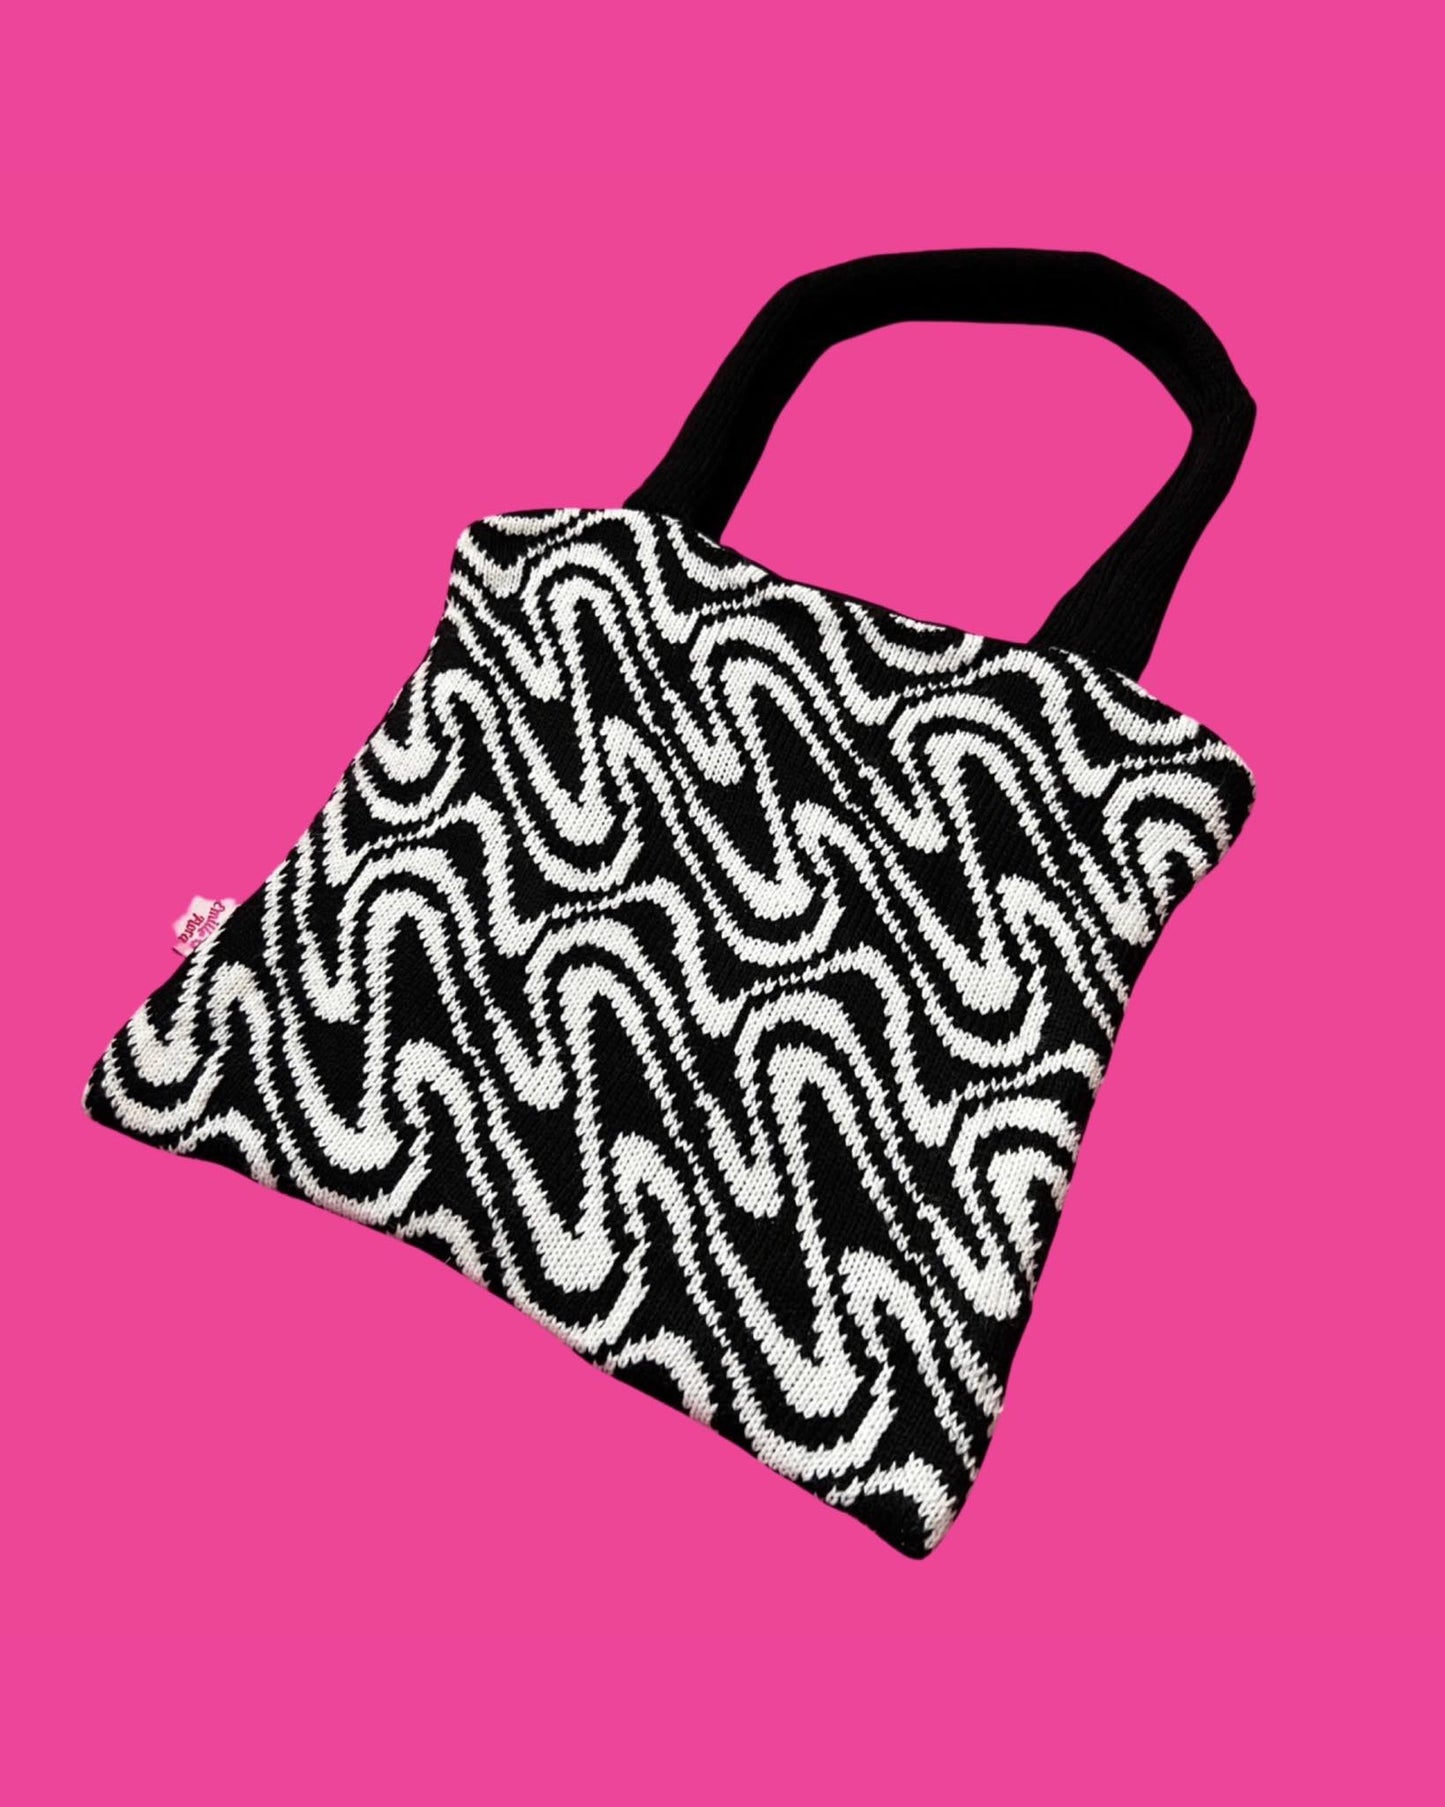 Tote Bag - Swirly Black and White - READY TO SHIP